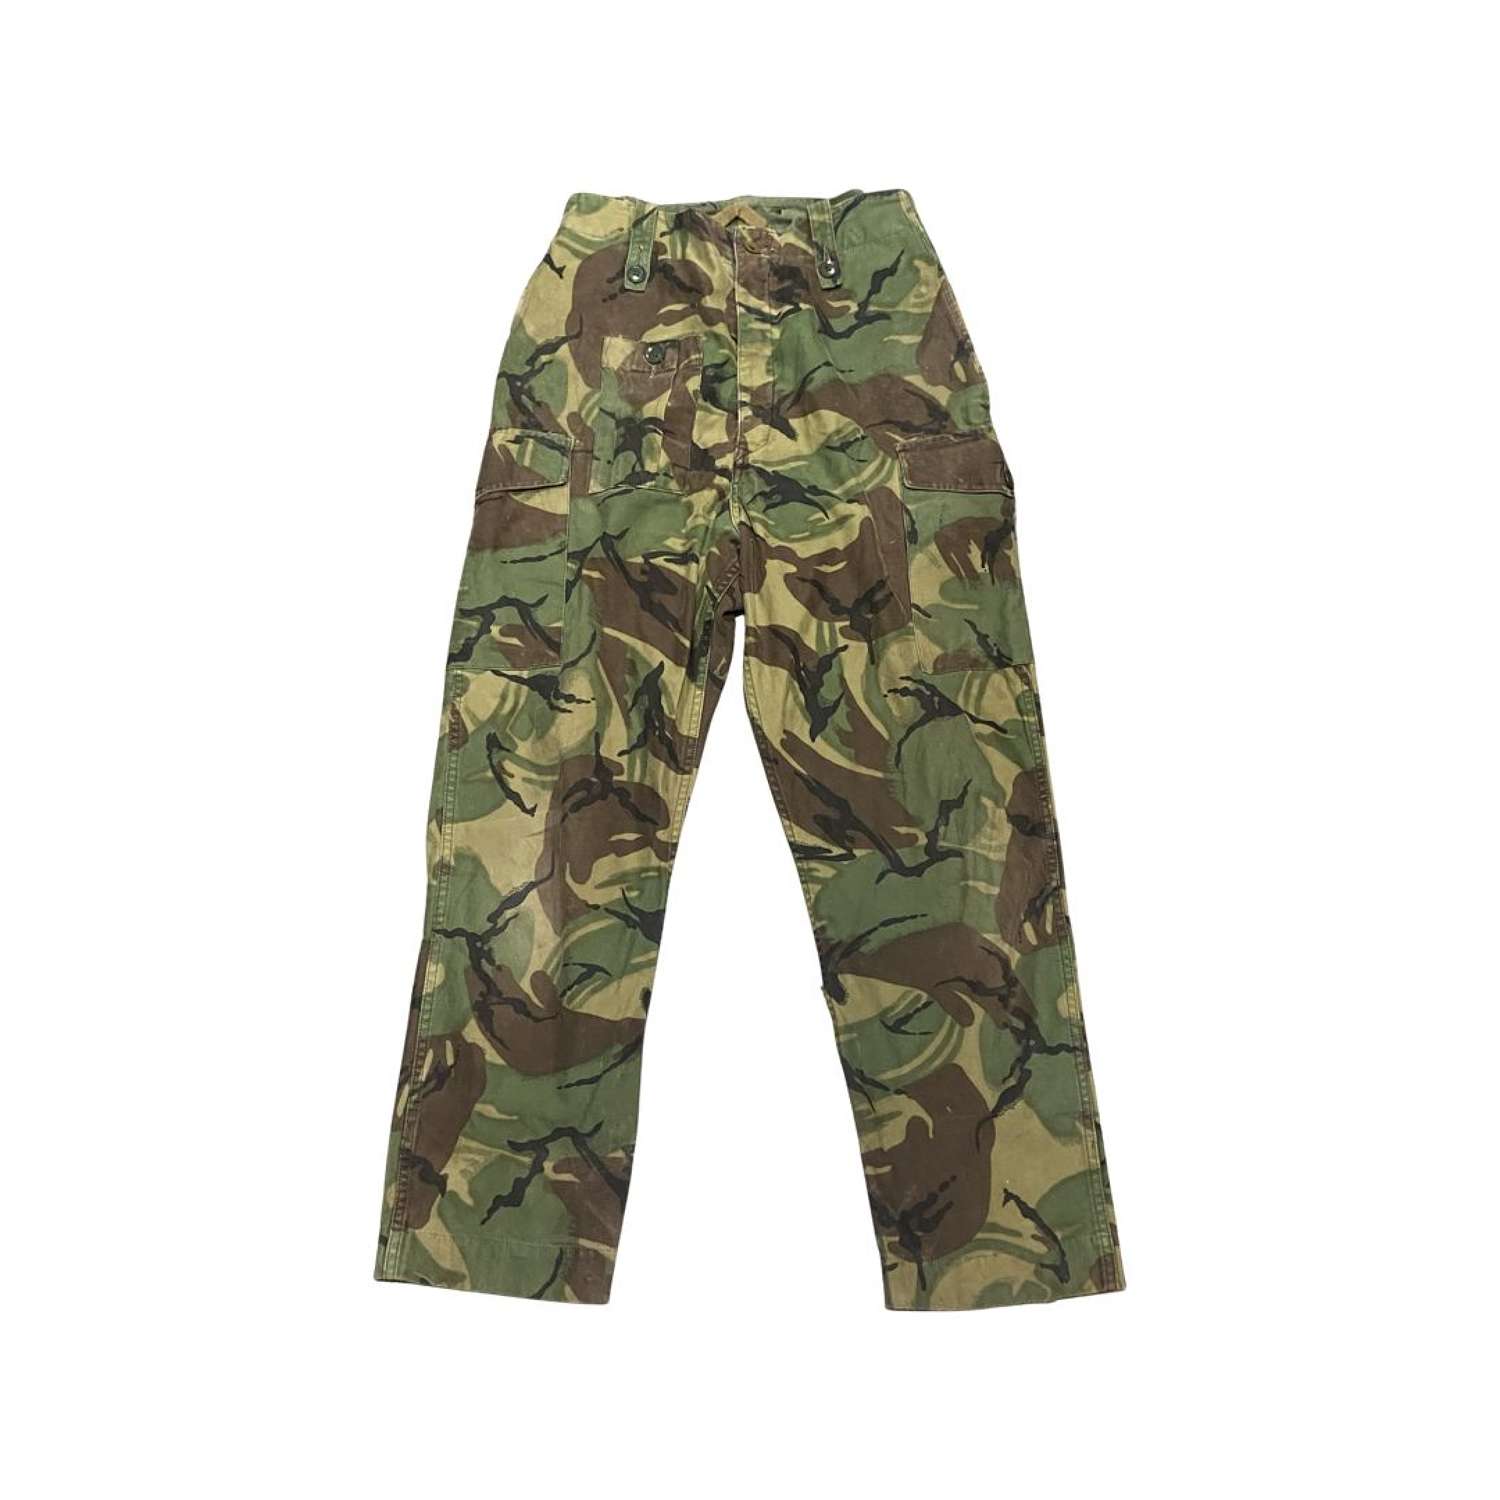 Post WW2 British Army Trousers DPM Temperate 1994 Pattern